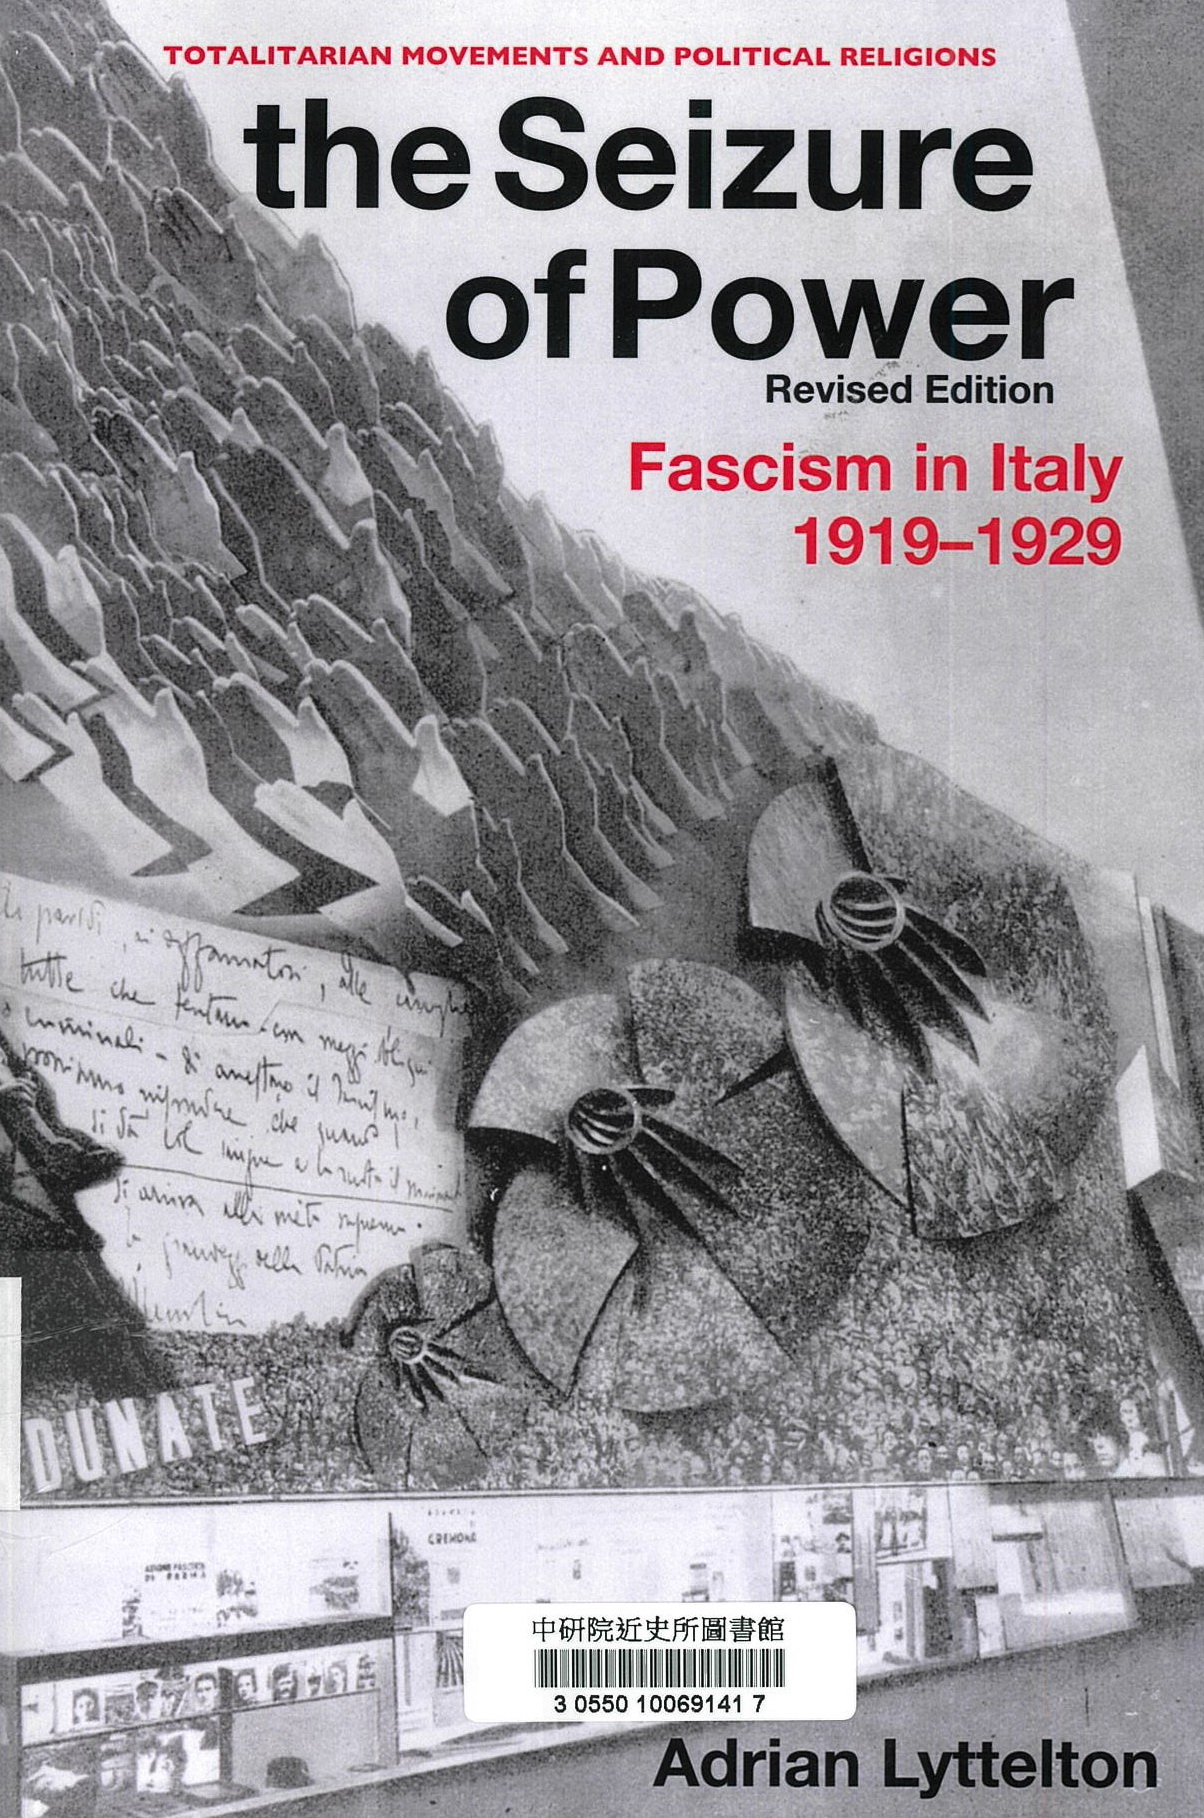 The seizure of power : fascism in Italy, 1919-1929